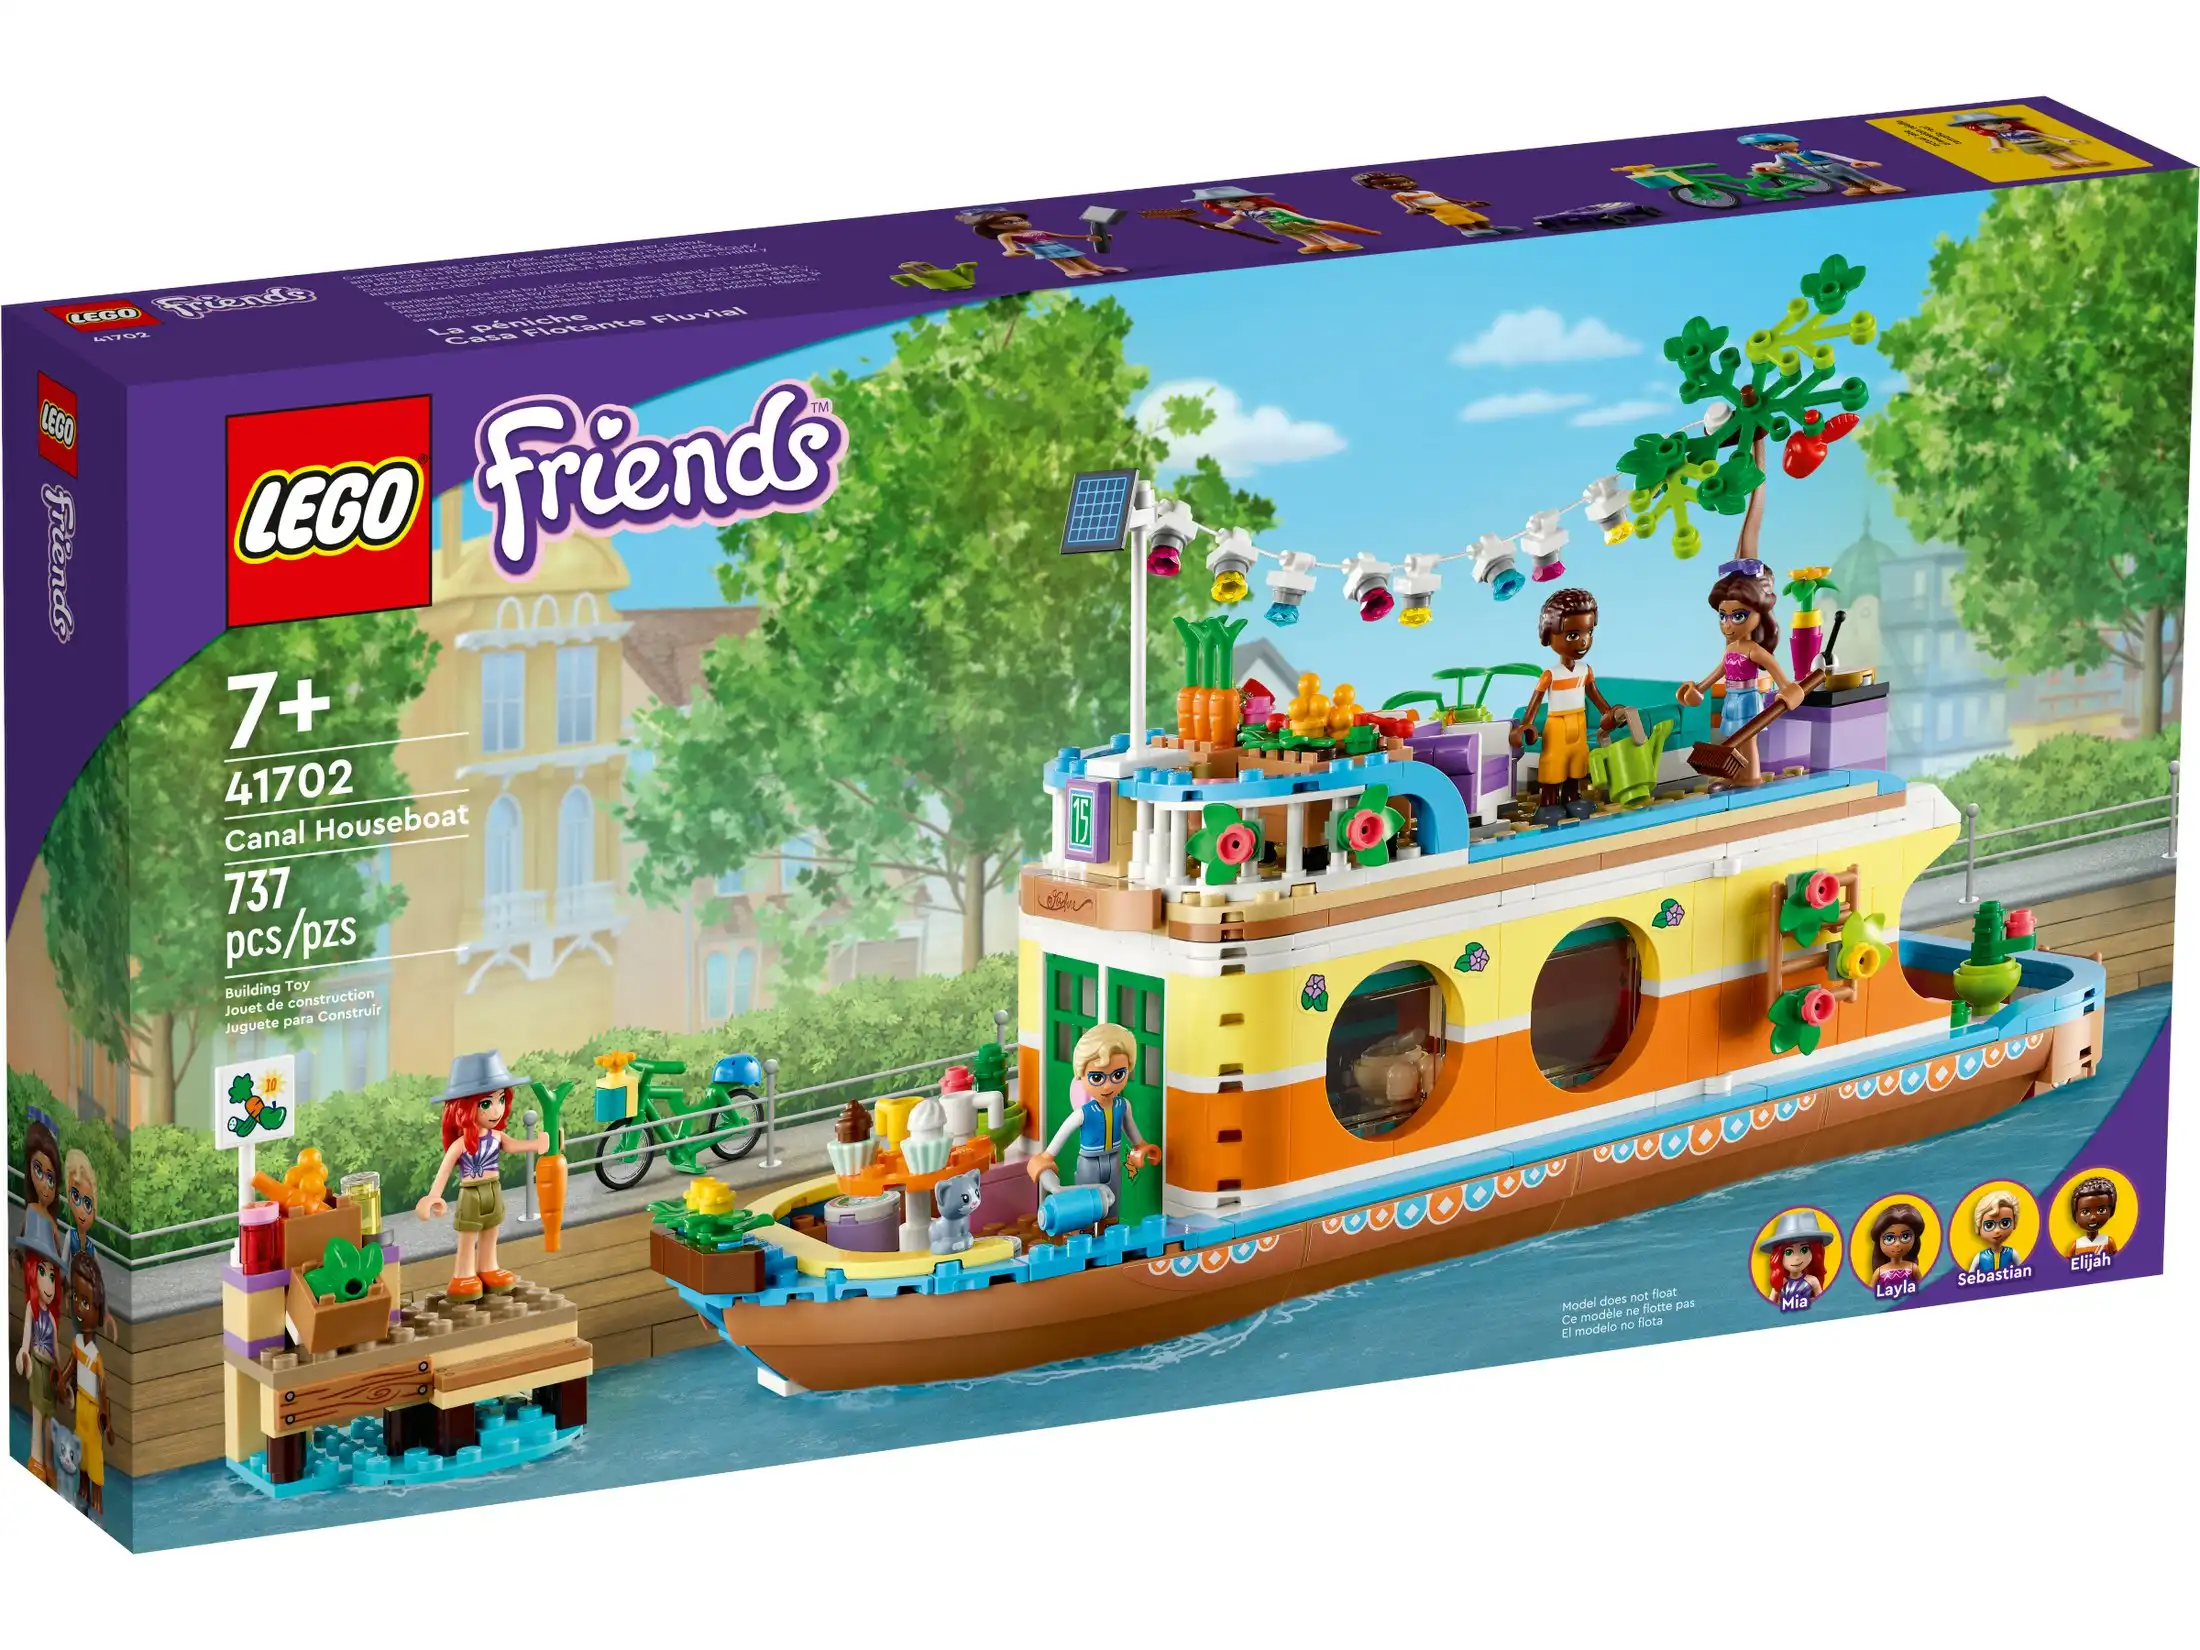 LEGO 41702 Canal Houseboat - Friends